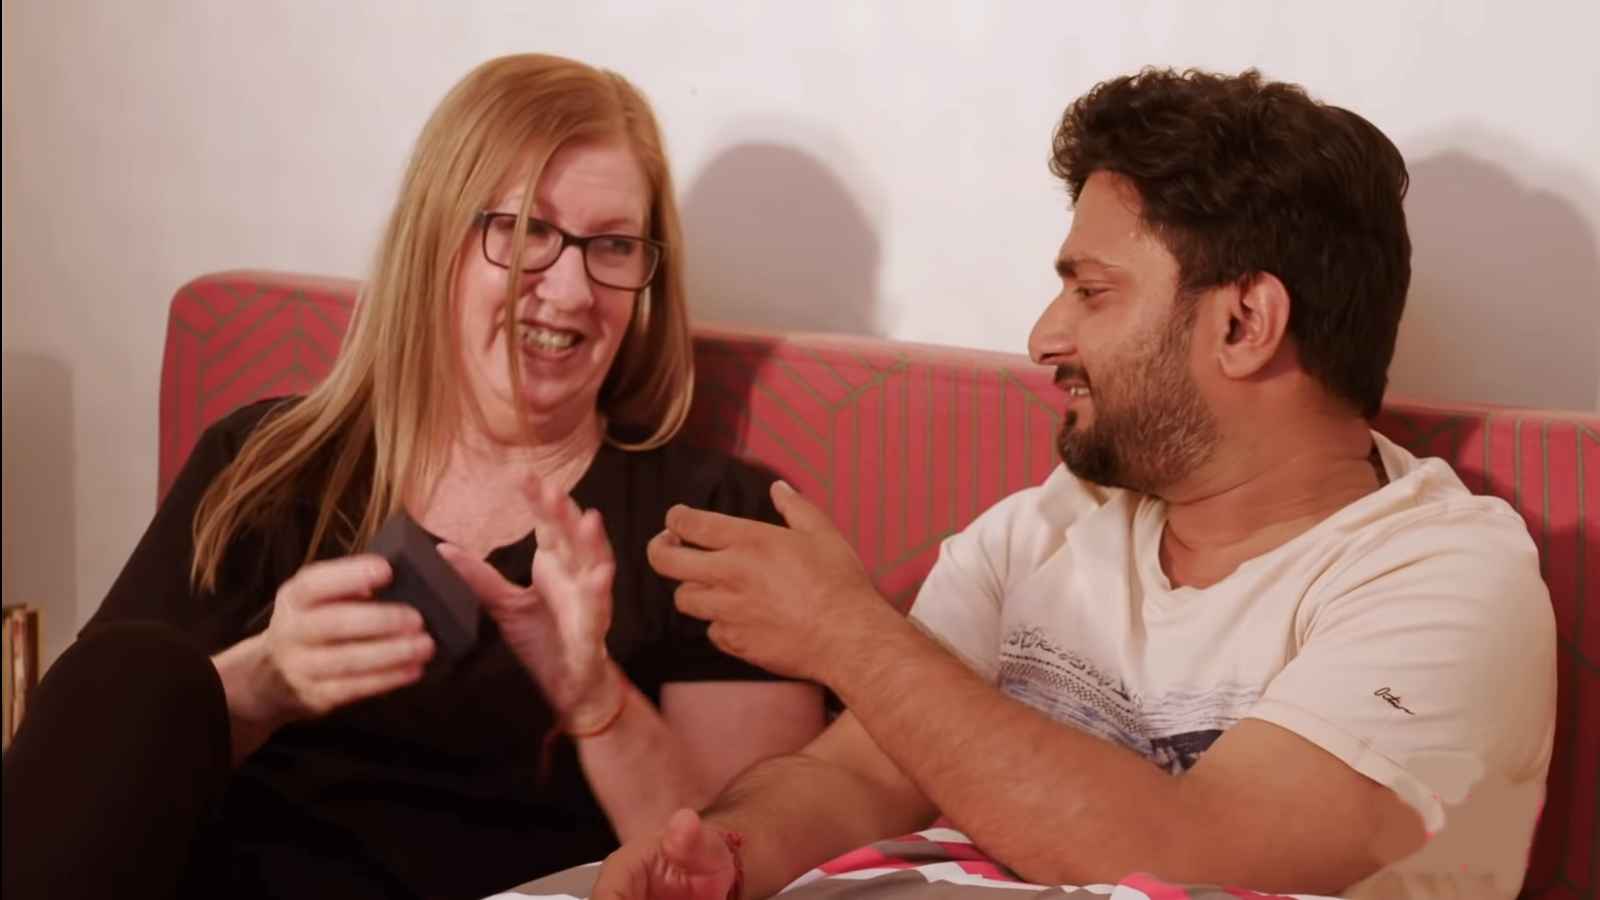 Jenny and Sumit of 90 Day Fiance: The Other Way